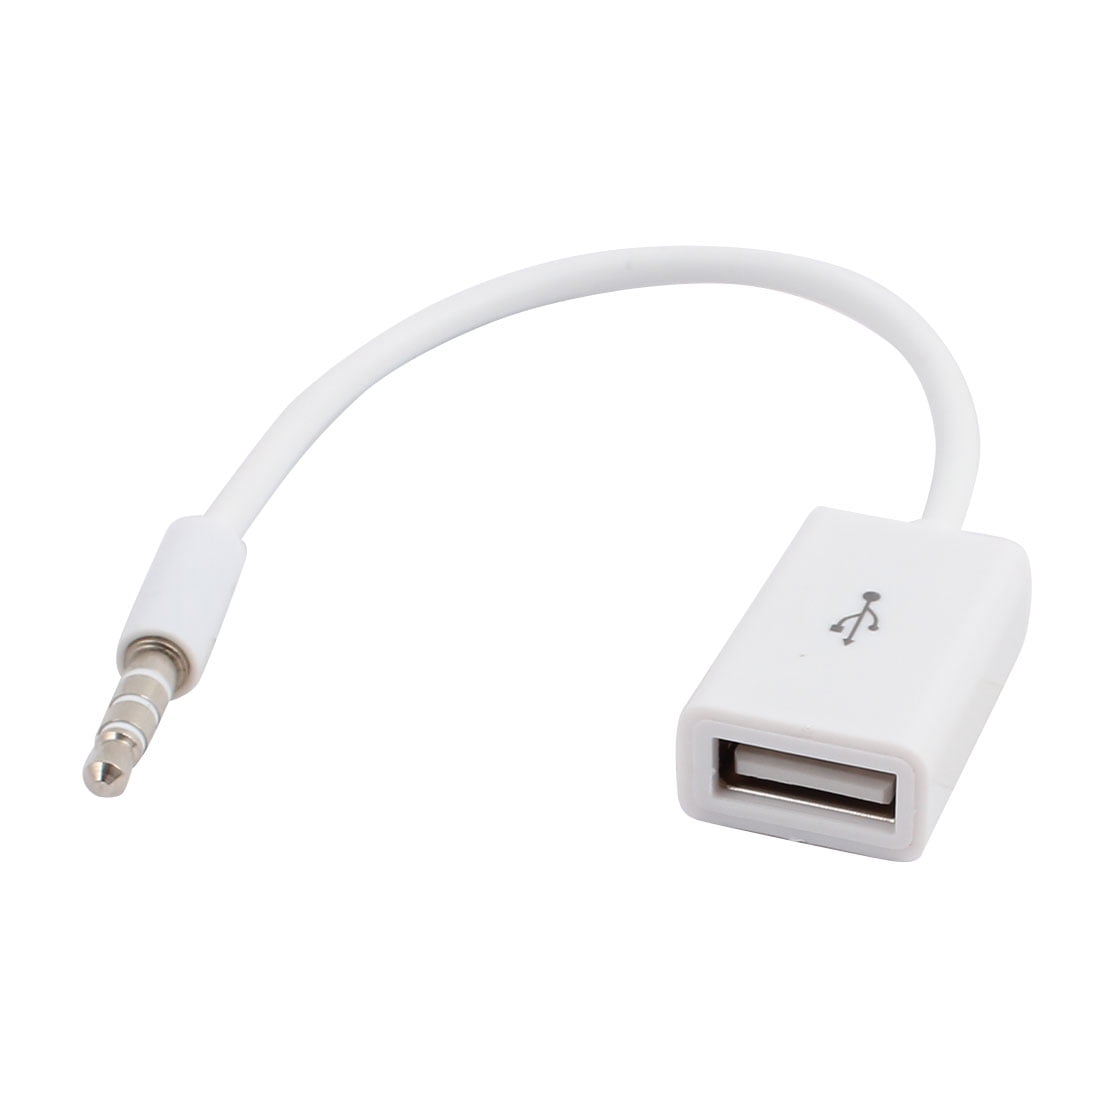 pålidelighed redde Forekomme Sync 3.5mm Male AUX Audio Plug Jack to USB 2.0 Female Converter Cable Cord  - Walmart.com